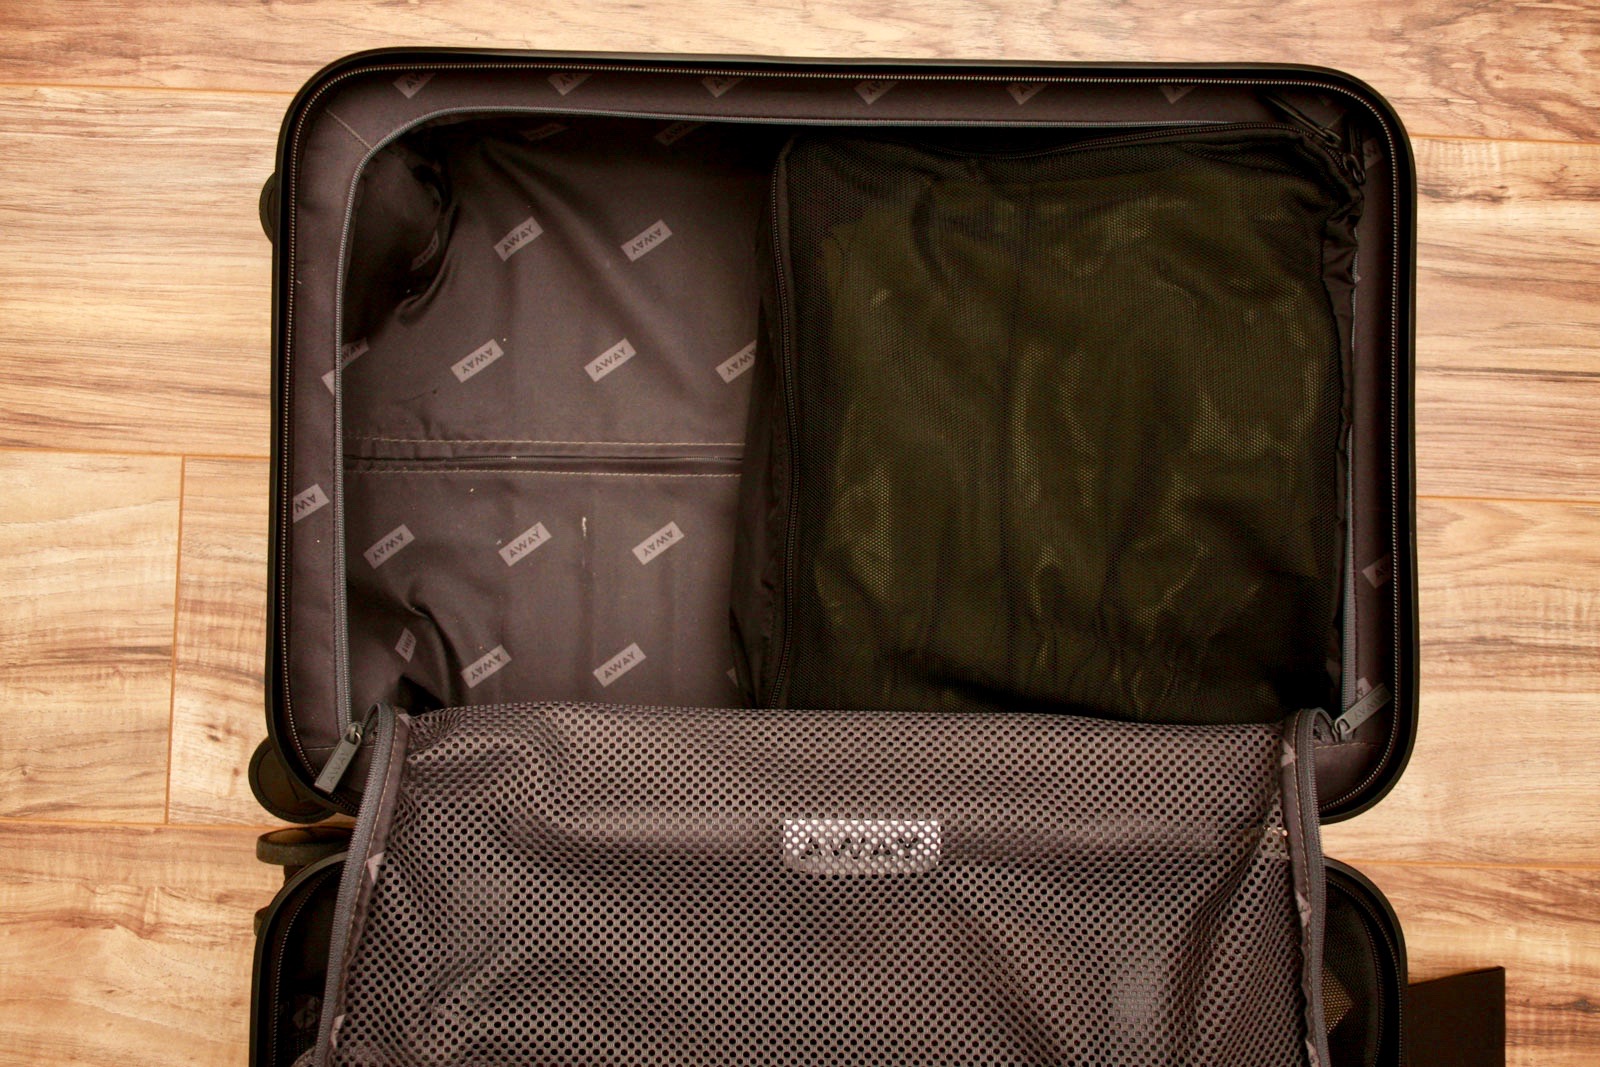 One Packing Cube inside an Away suitcase